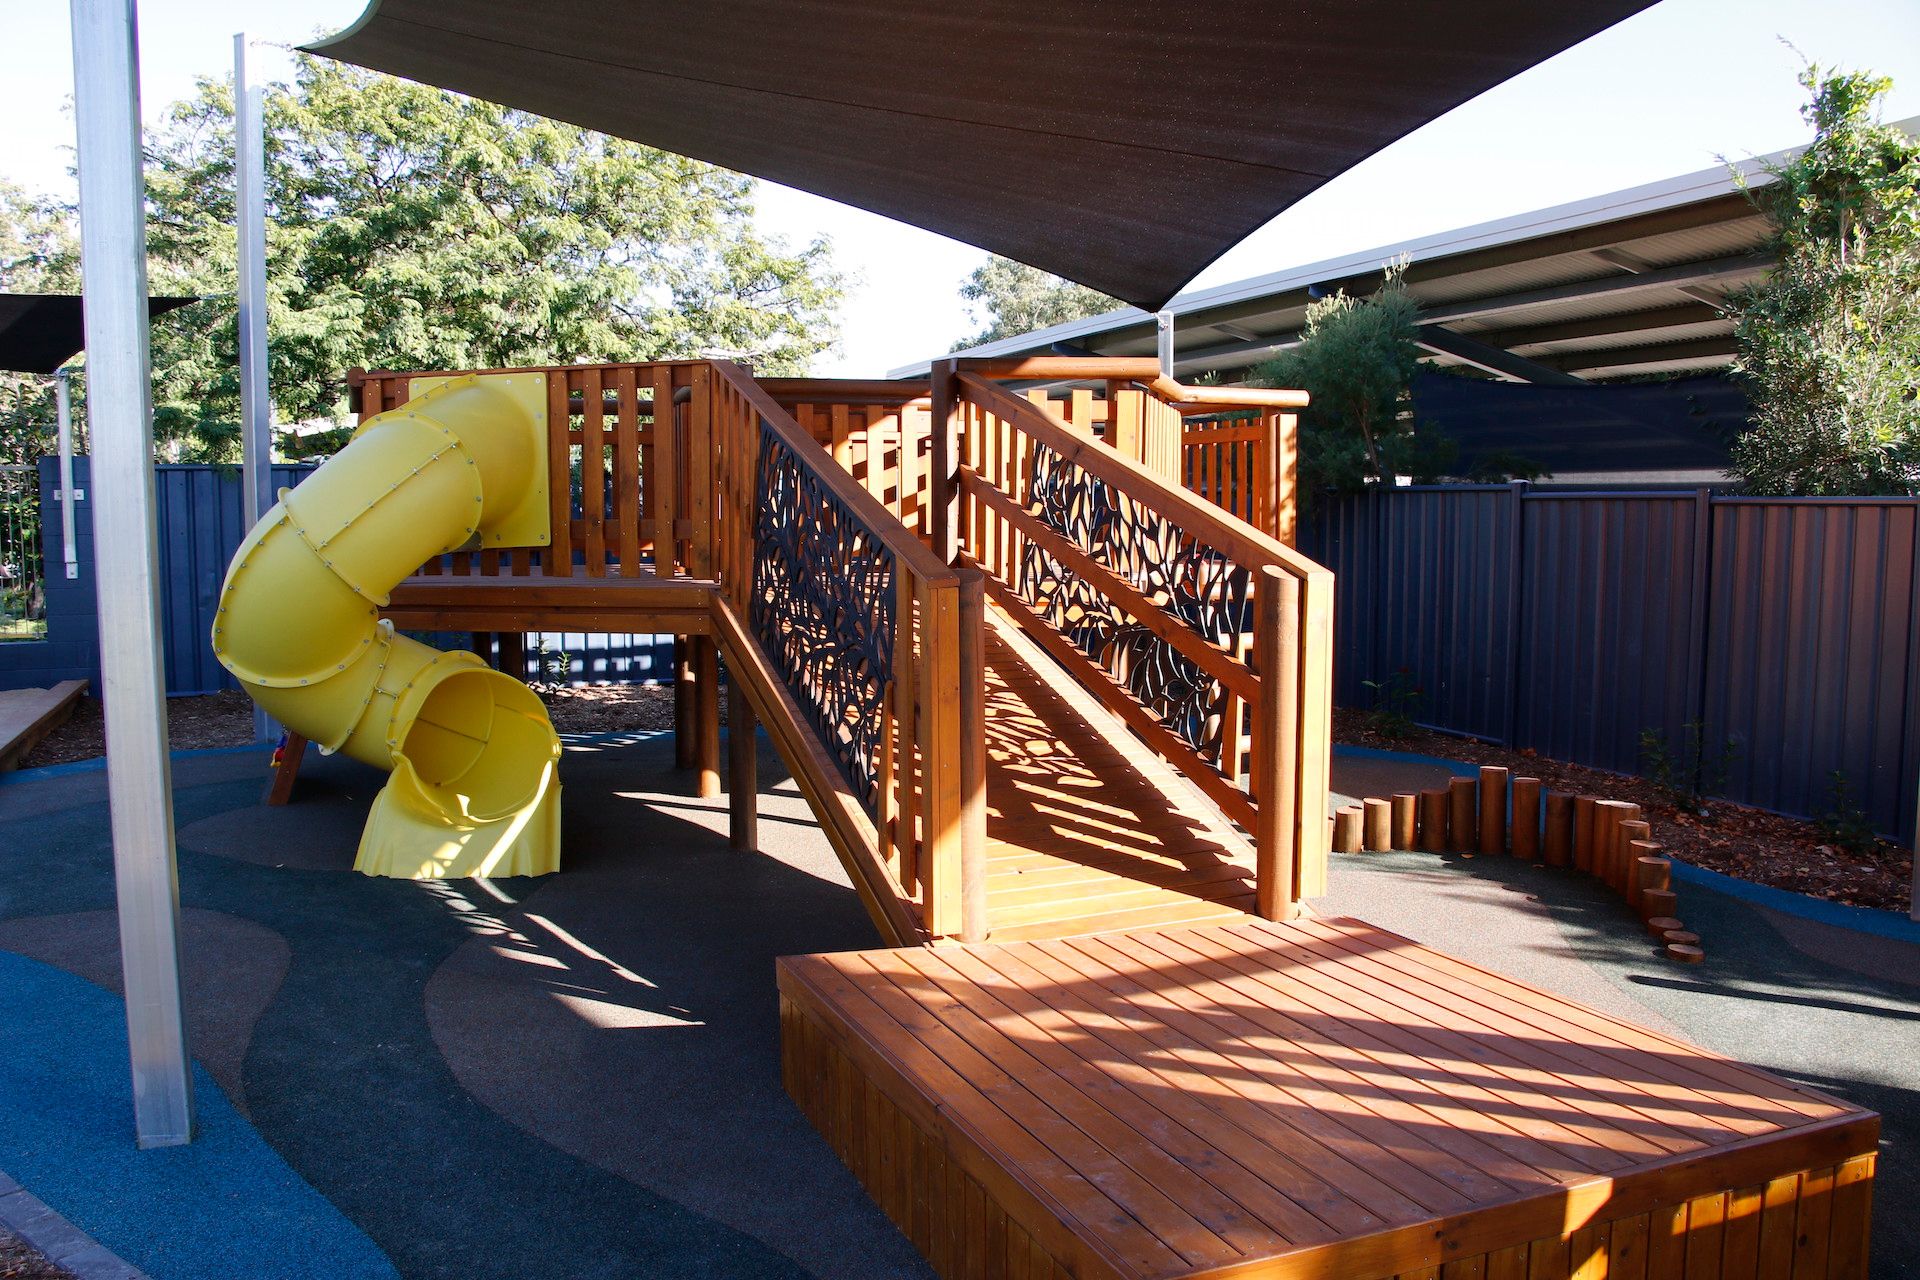 A playground with slide and climbing frame